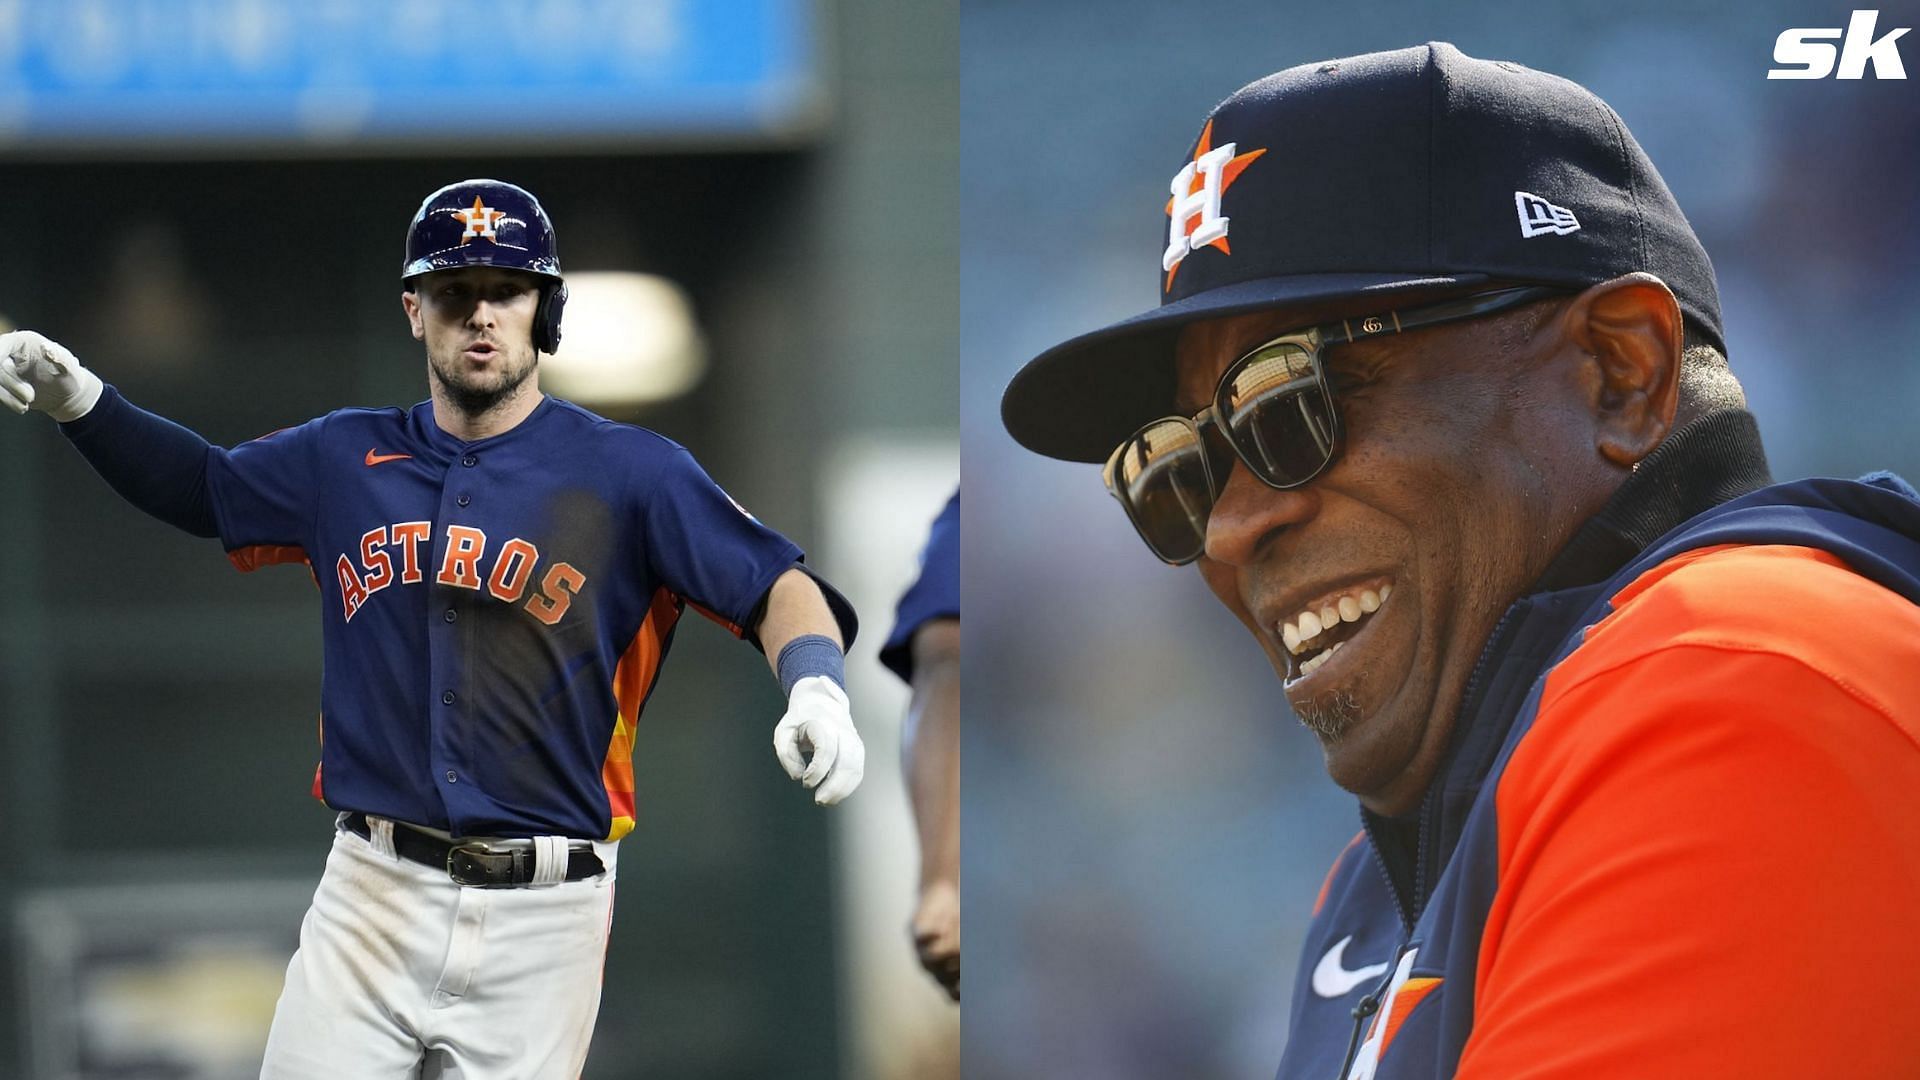 Alex Bregman and Dusty Baker of the Houston Astros